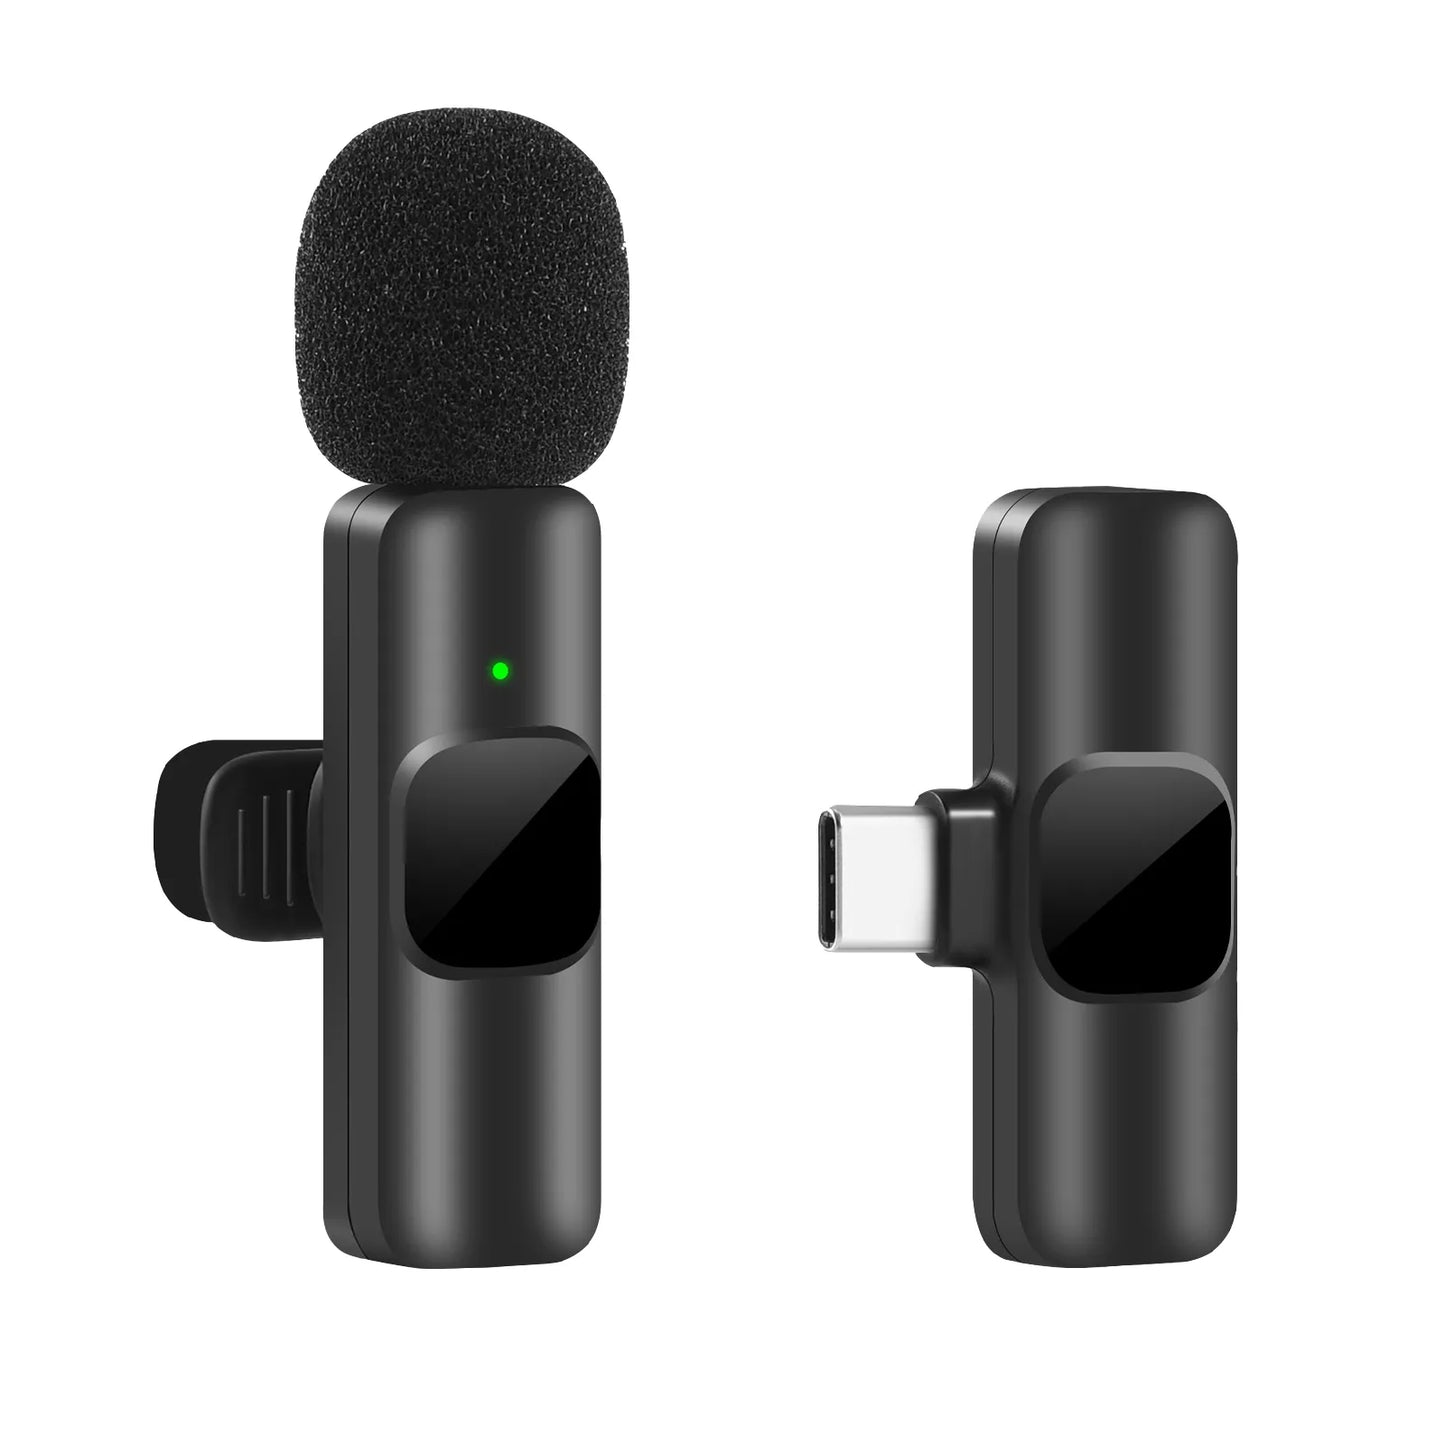 New portable wireless lavalier microphone for audio and video recording